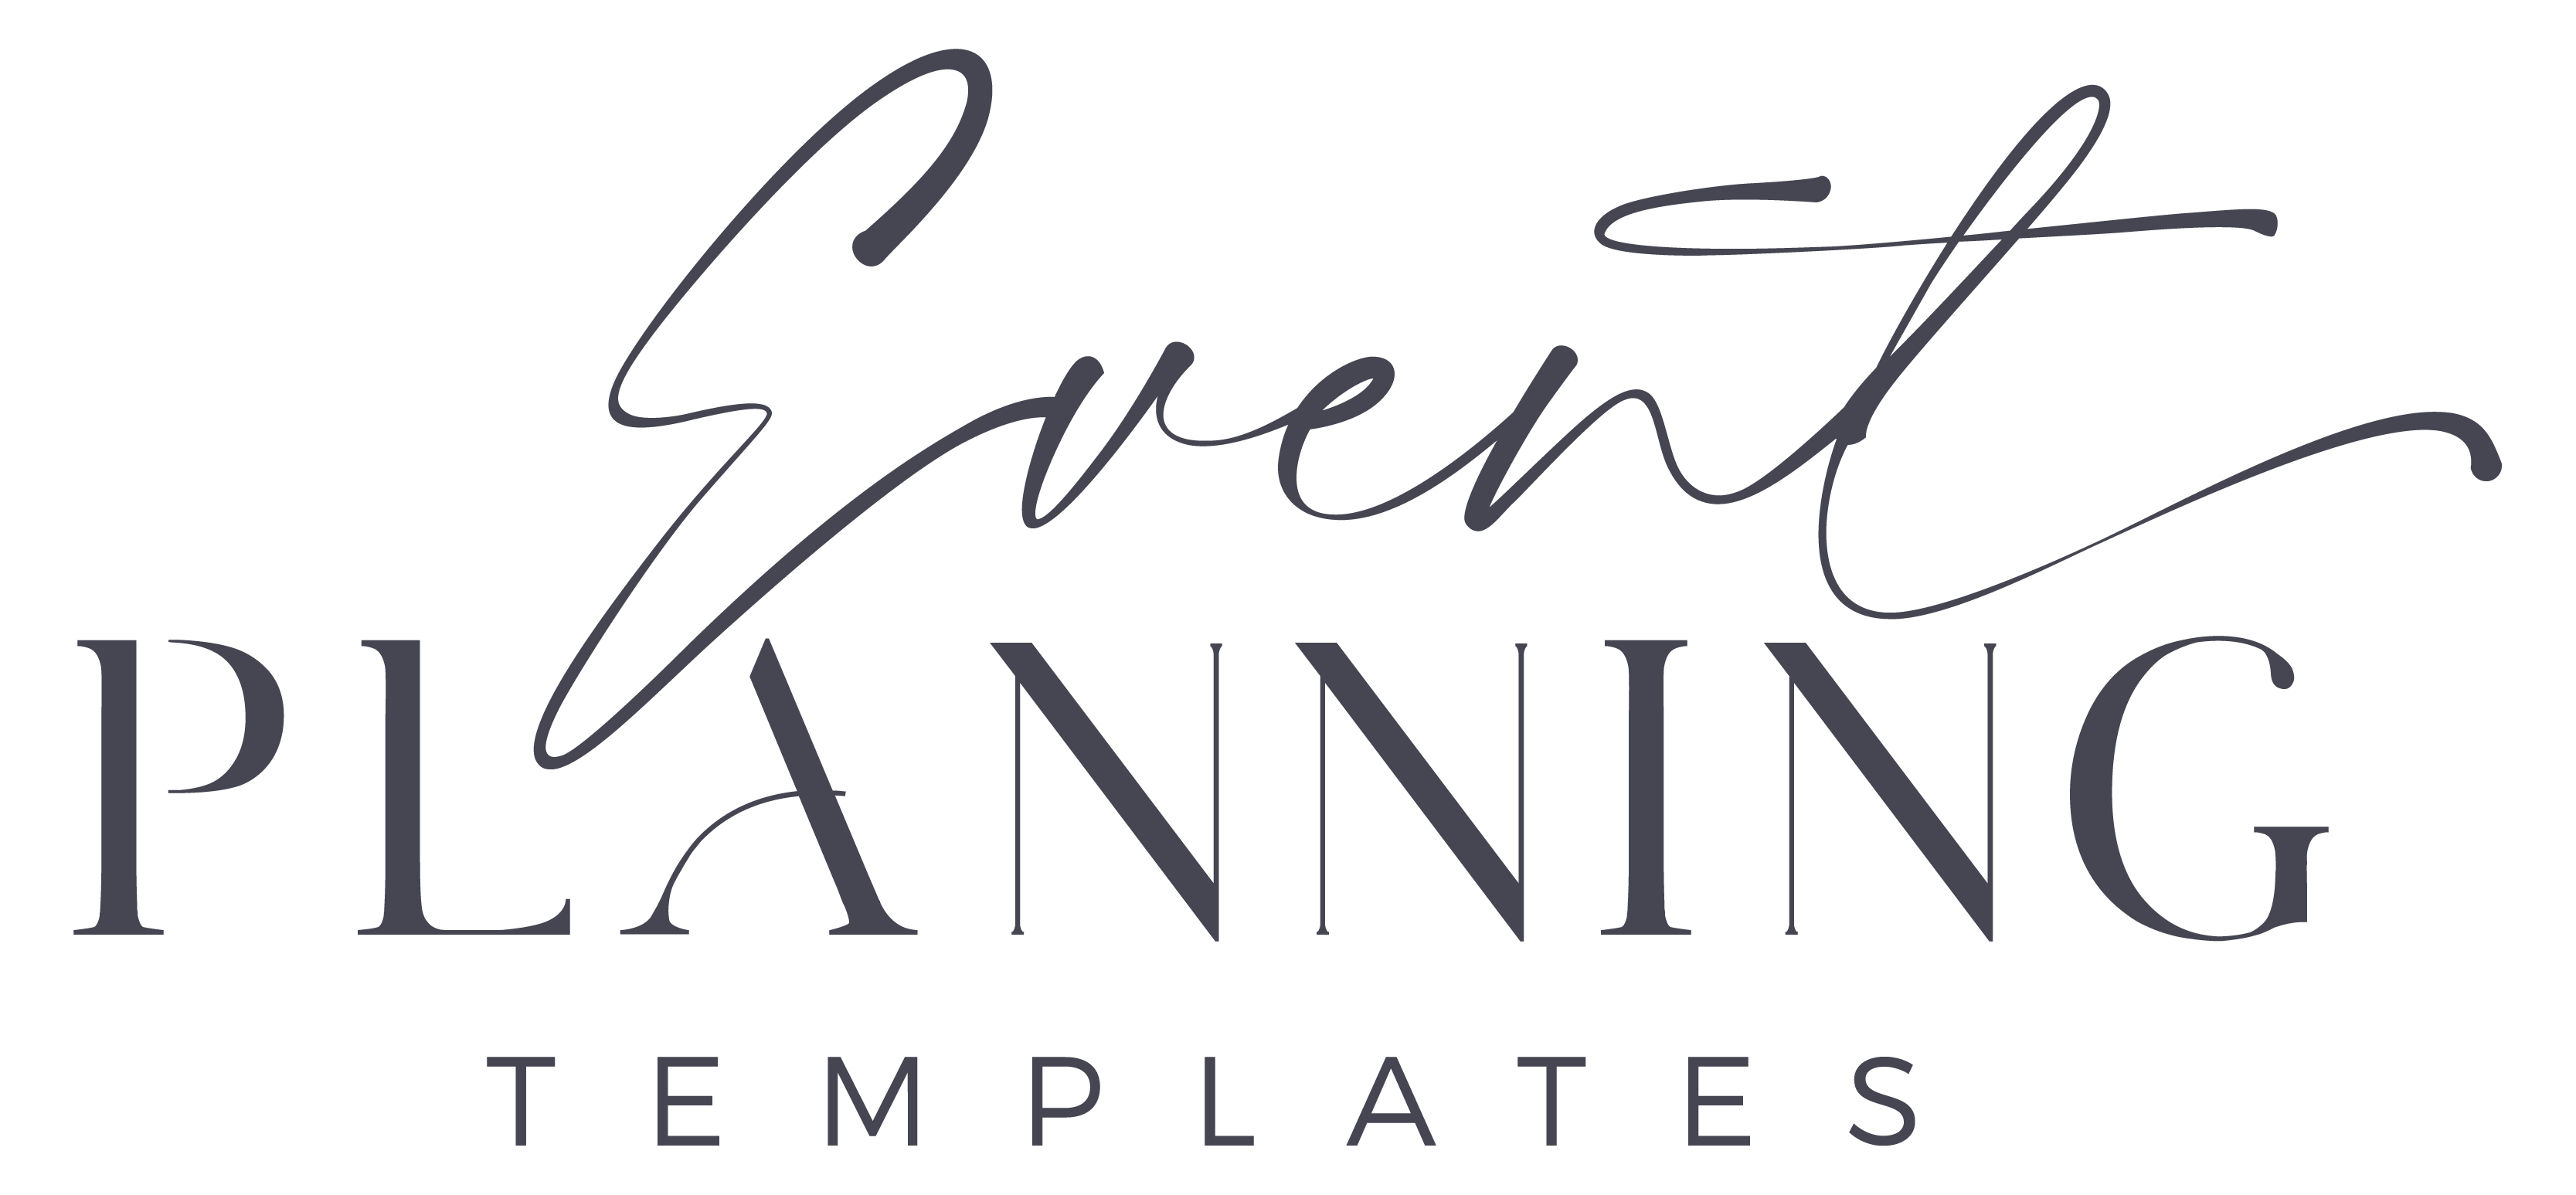 Event Planning Templates Shop | Wedding Planner Templates in Canva